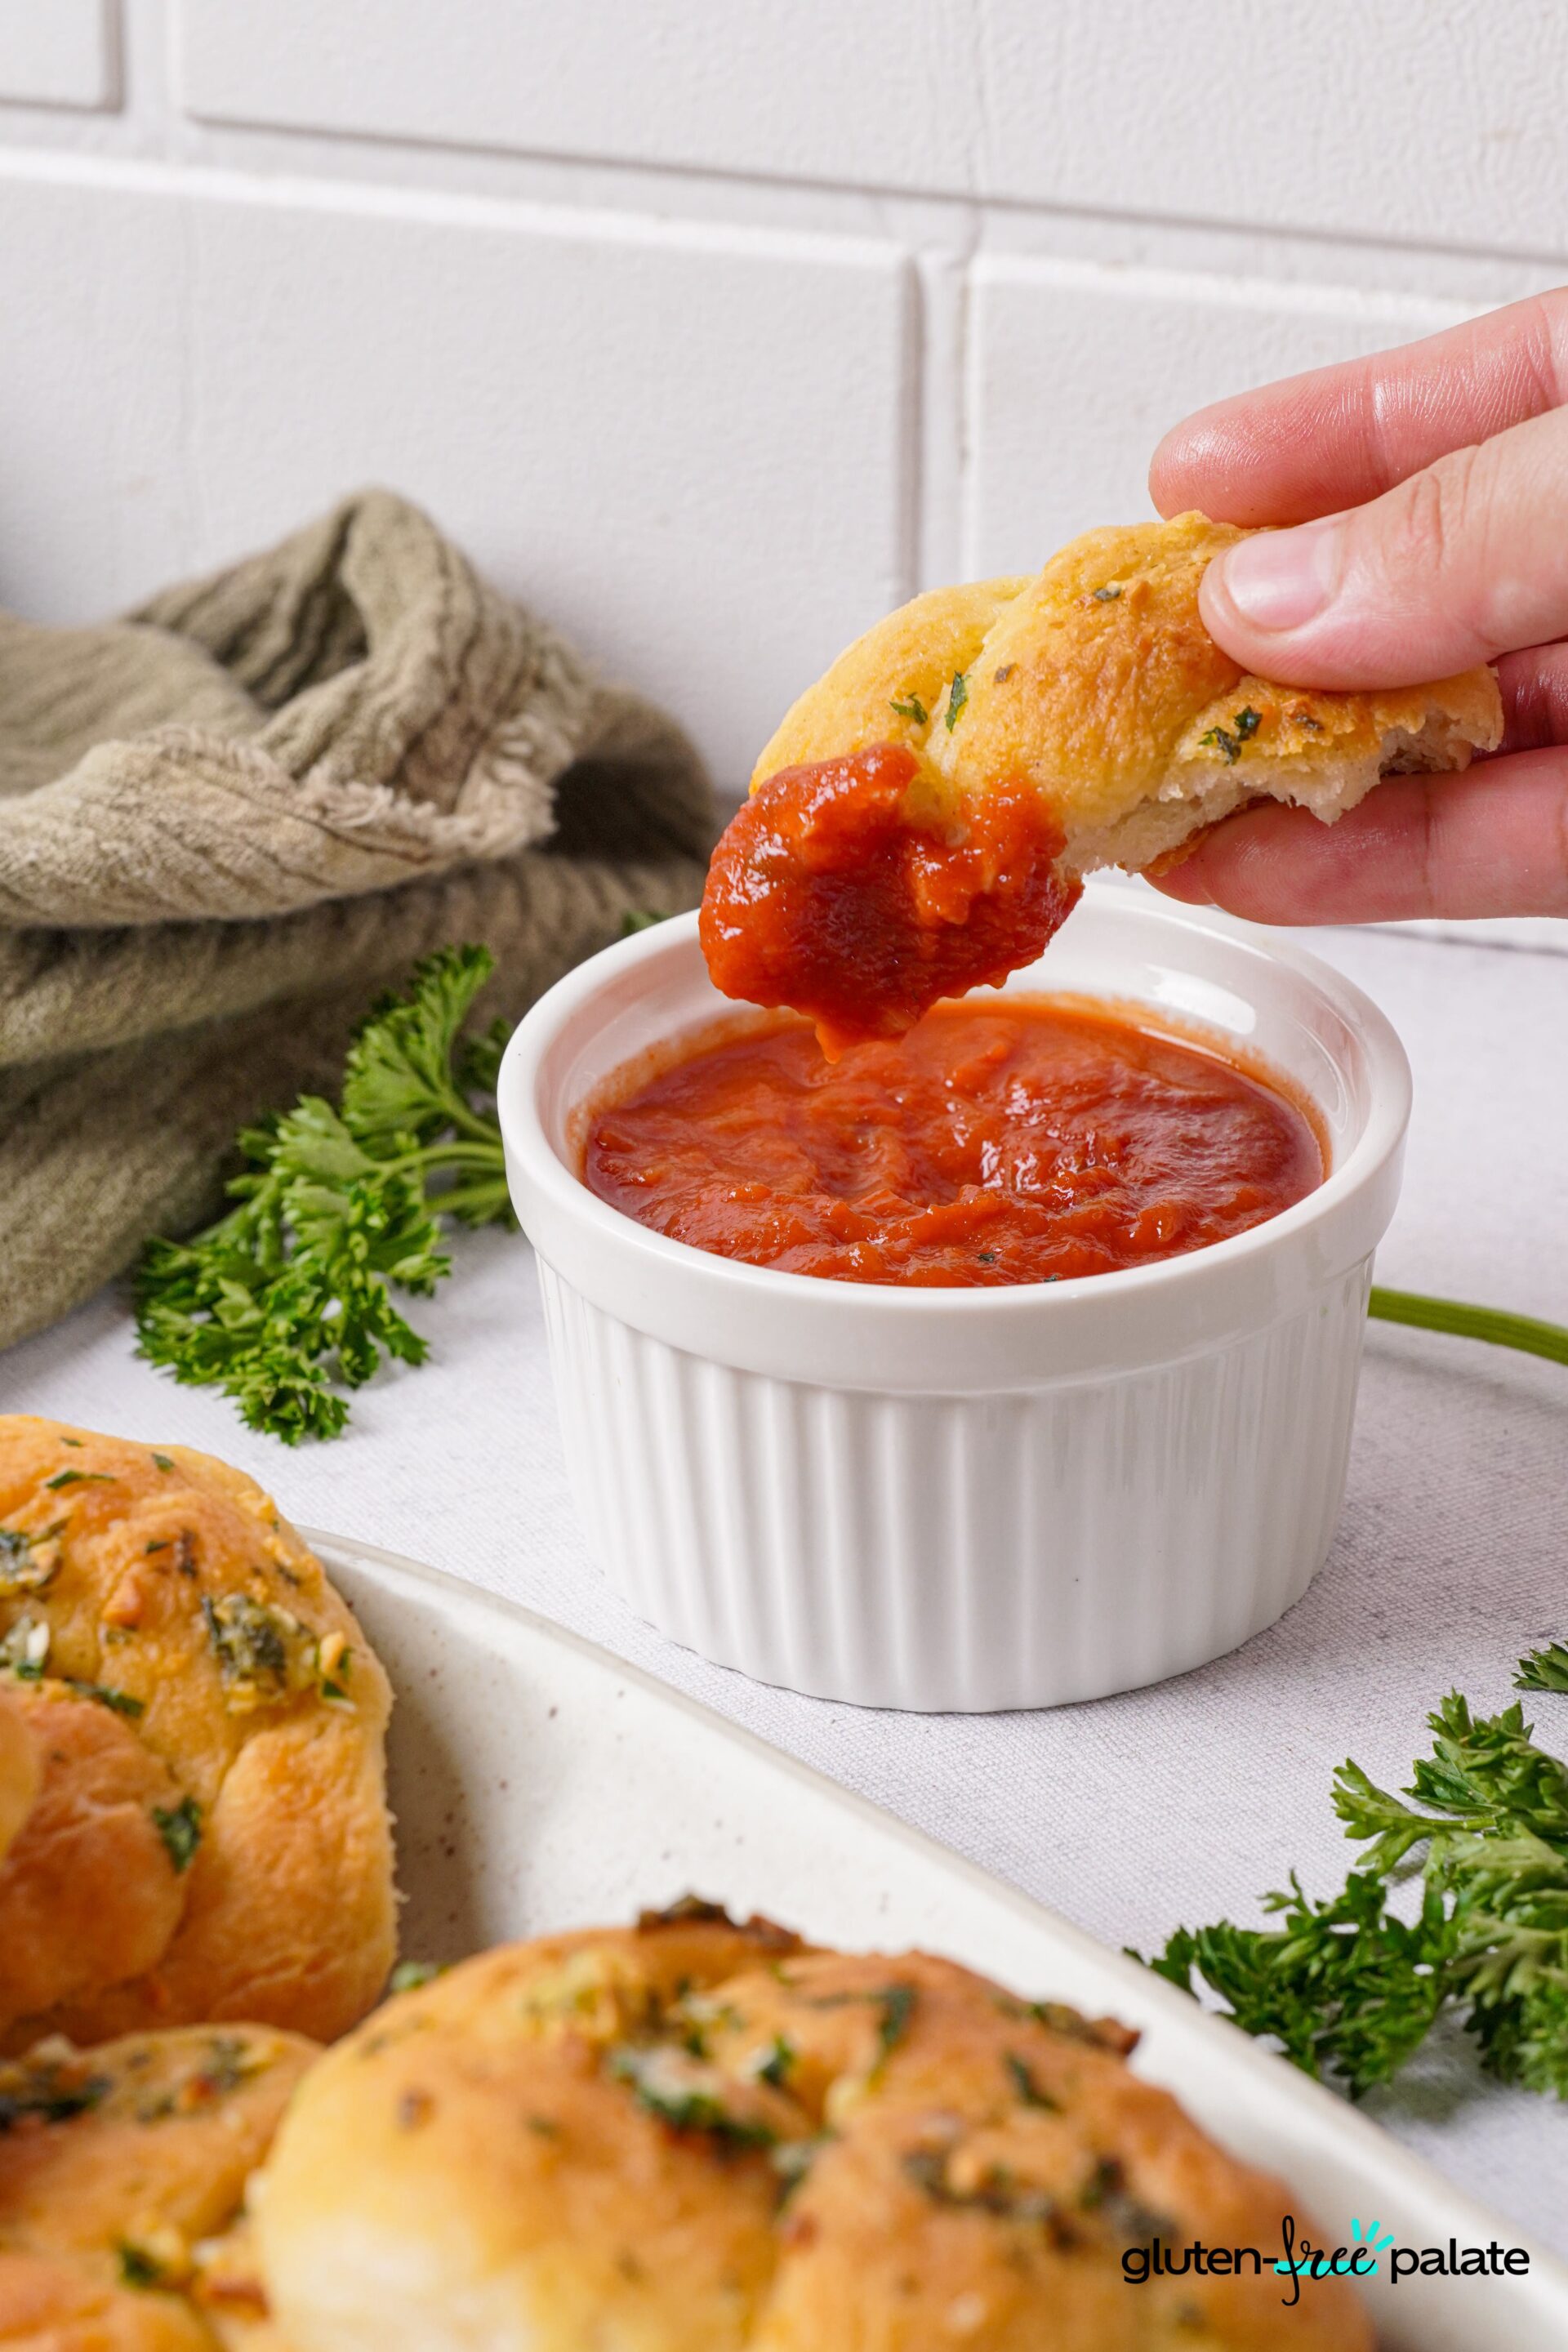 Gluten-free garlic knots on a white plate with toppings; one is dipped into a sauce.